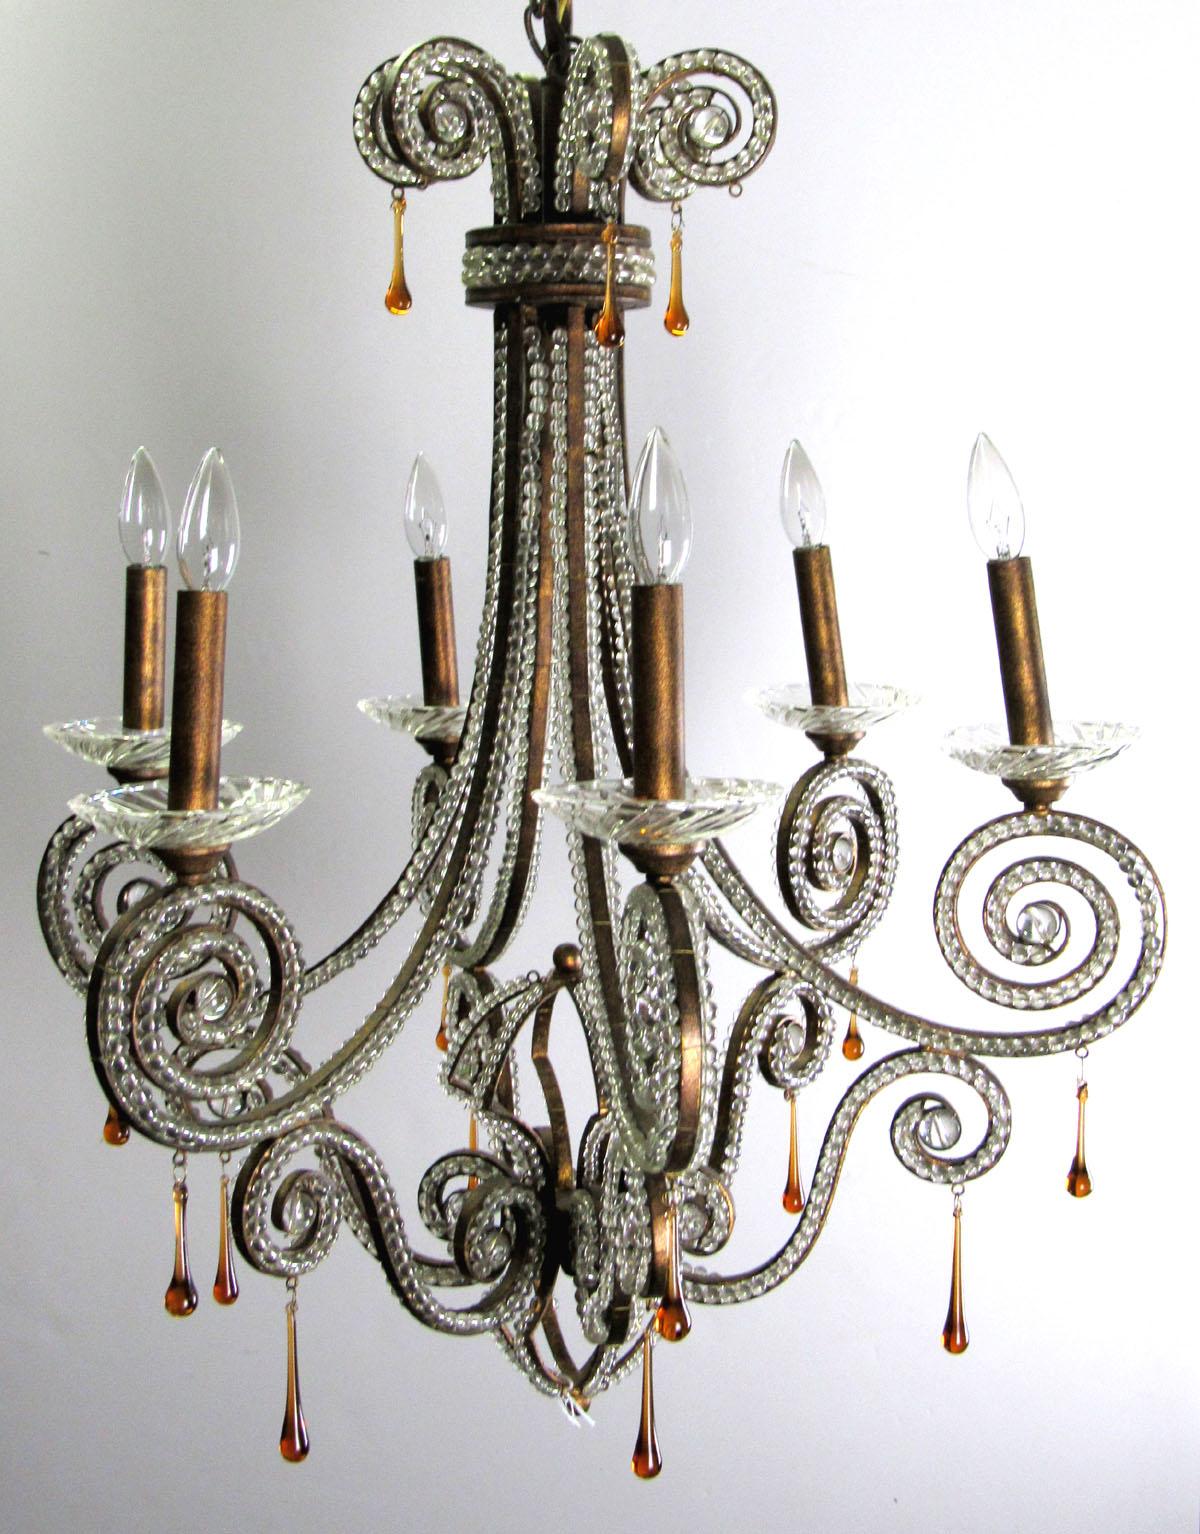 20th century French style chandelier with glass prisms and pendants.